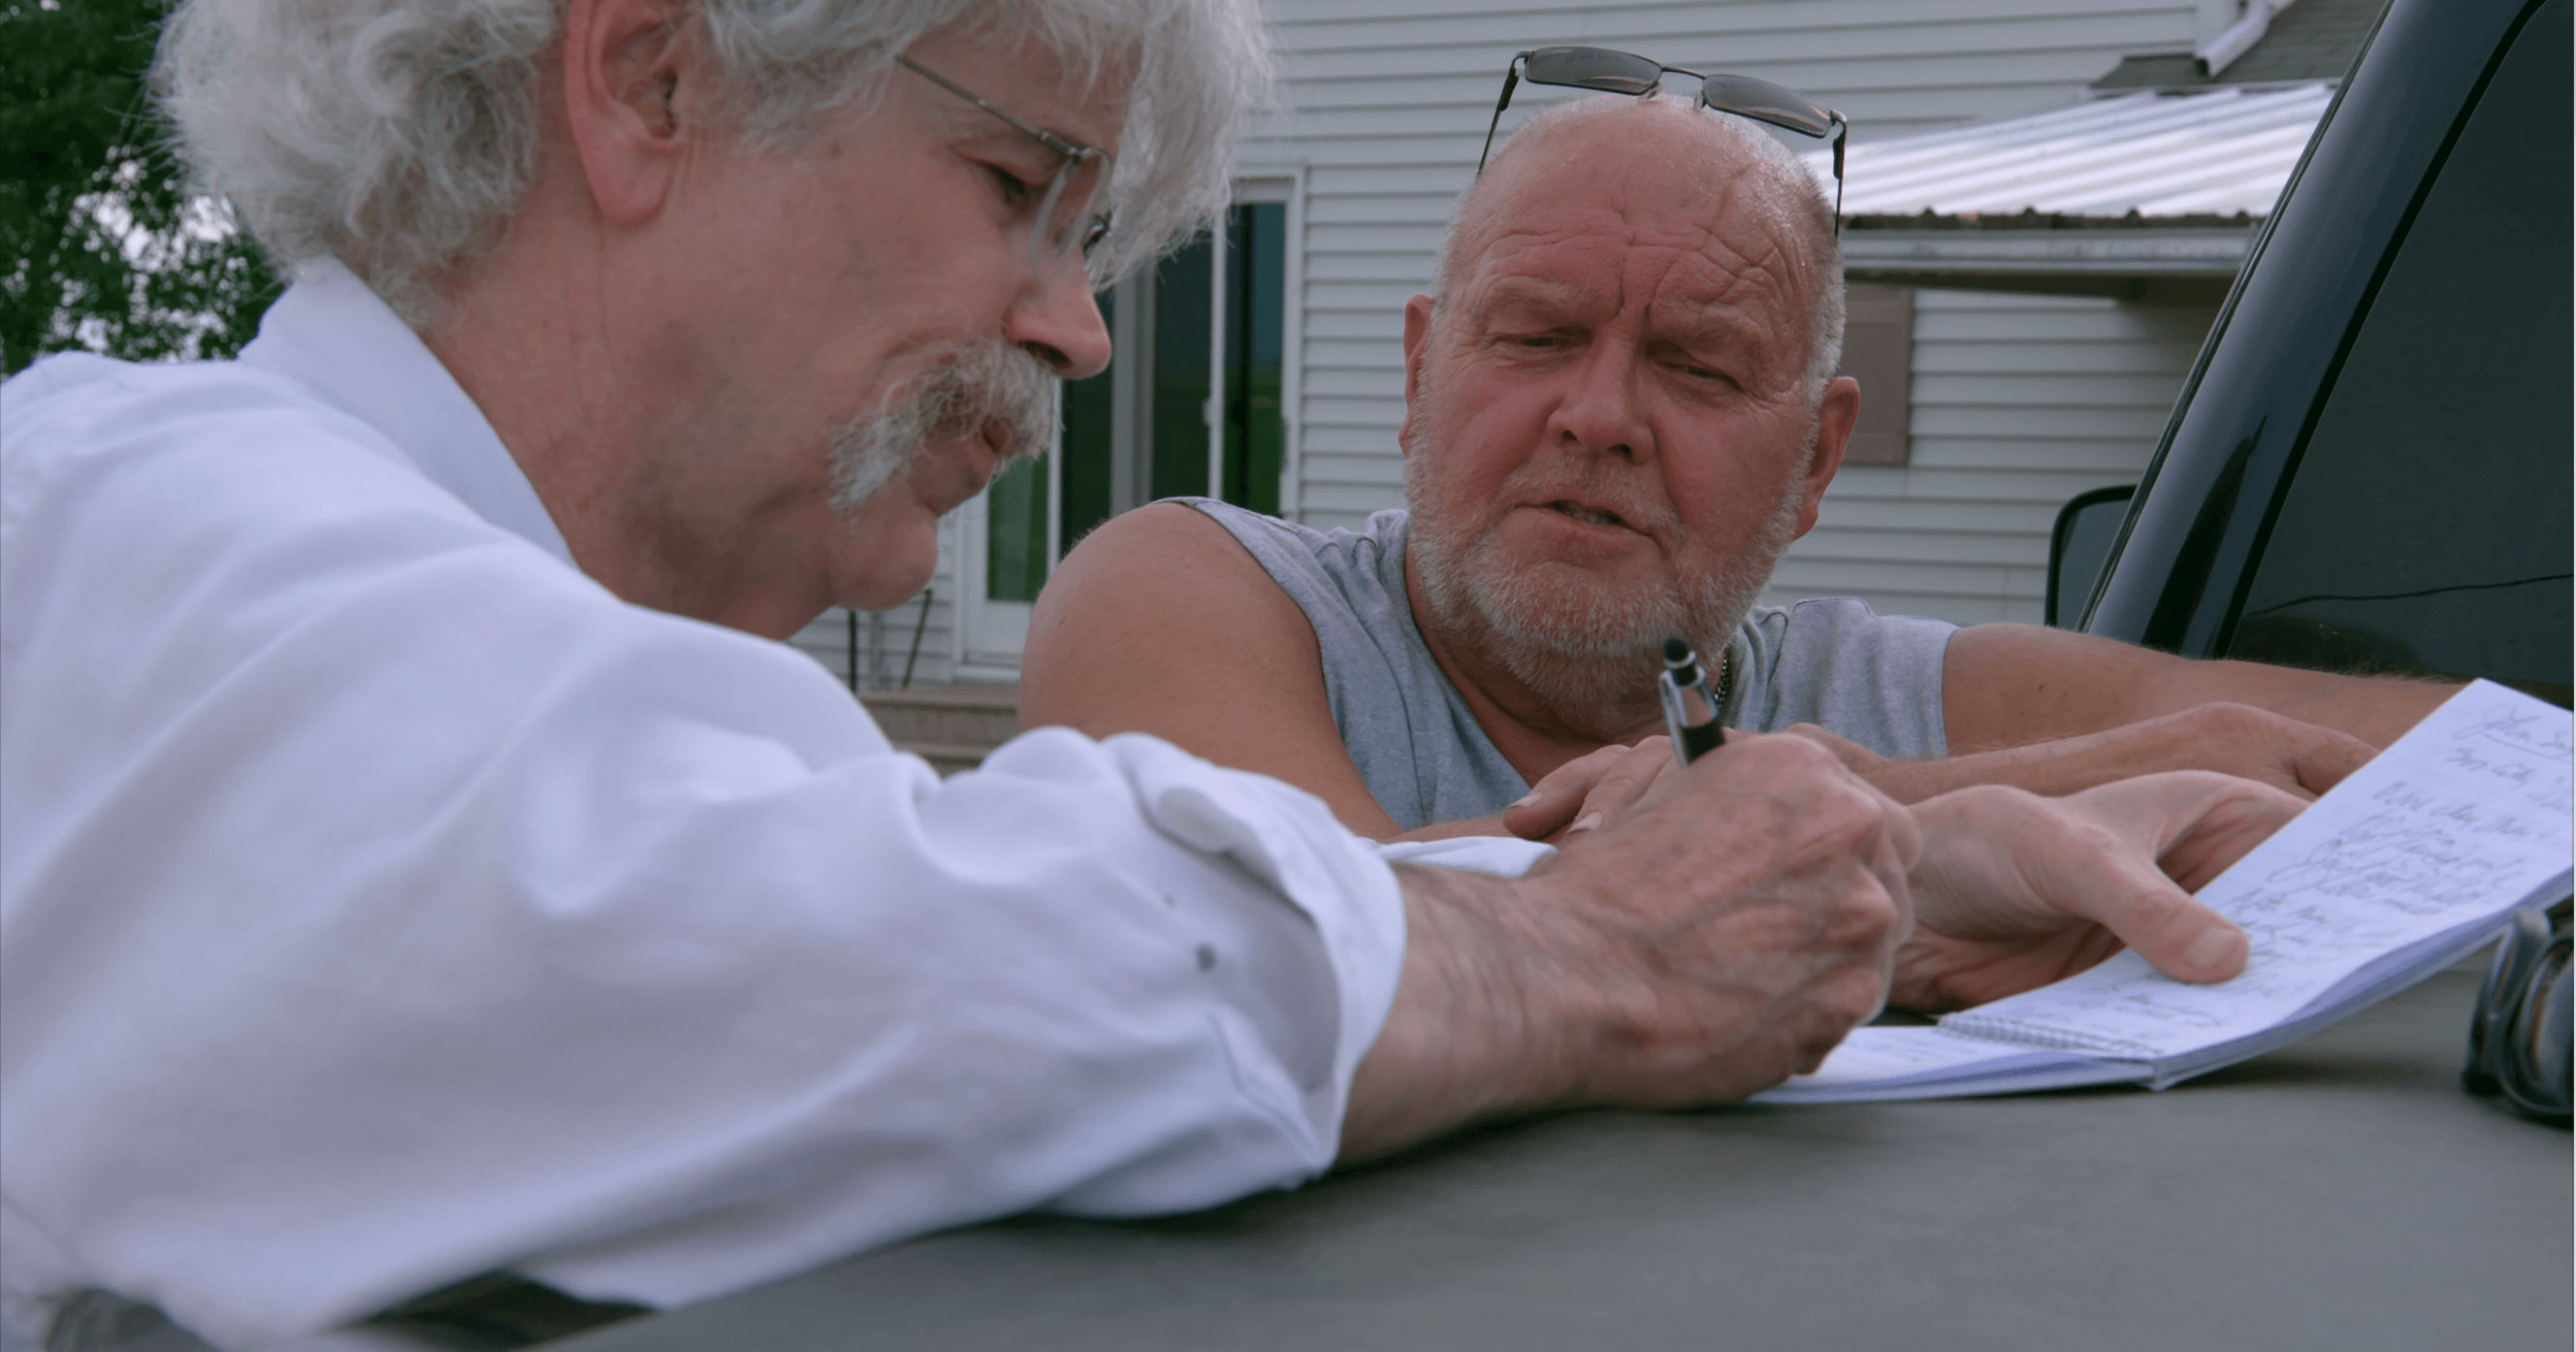 Still from Storm Lake. Art Cullen writes on paper, while other man watches him.